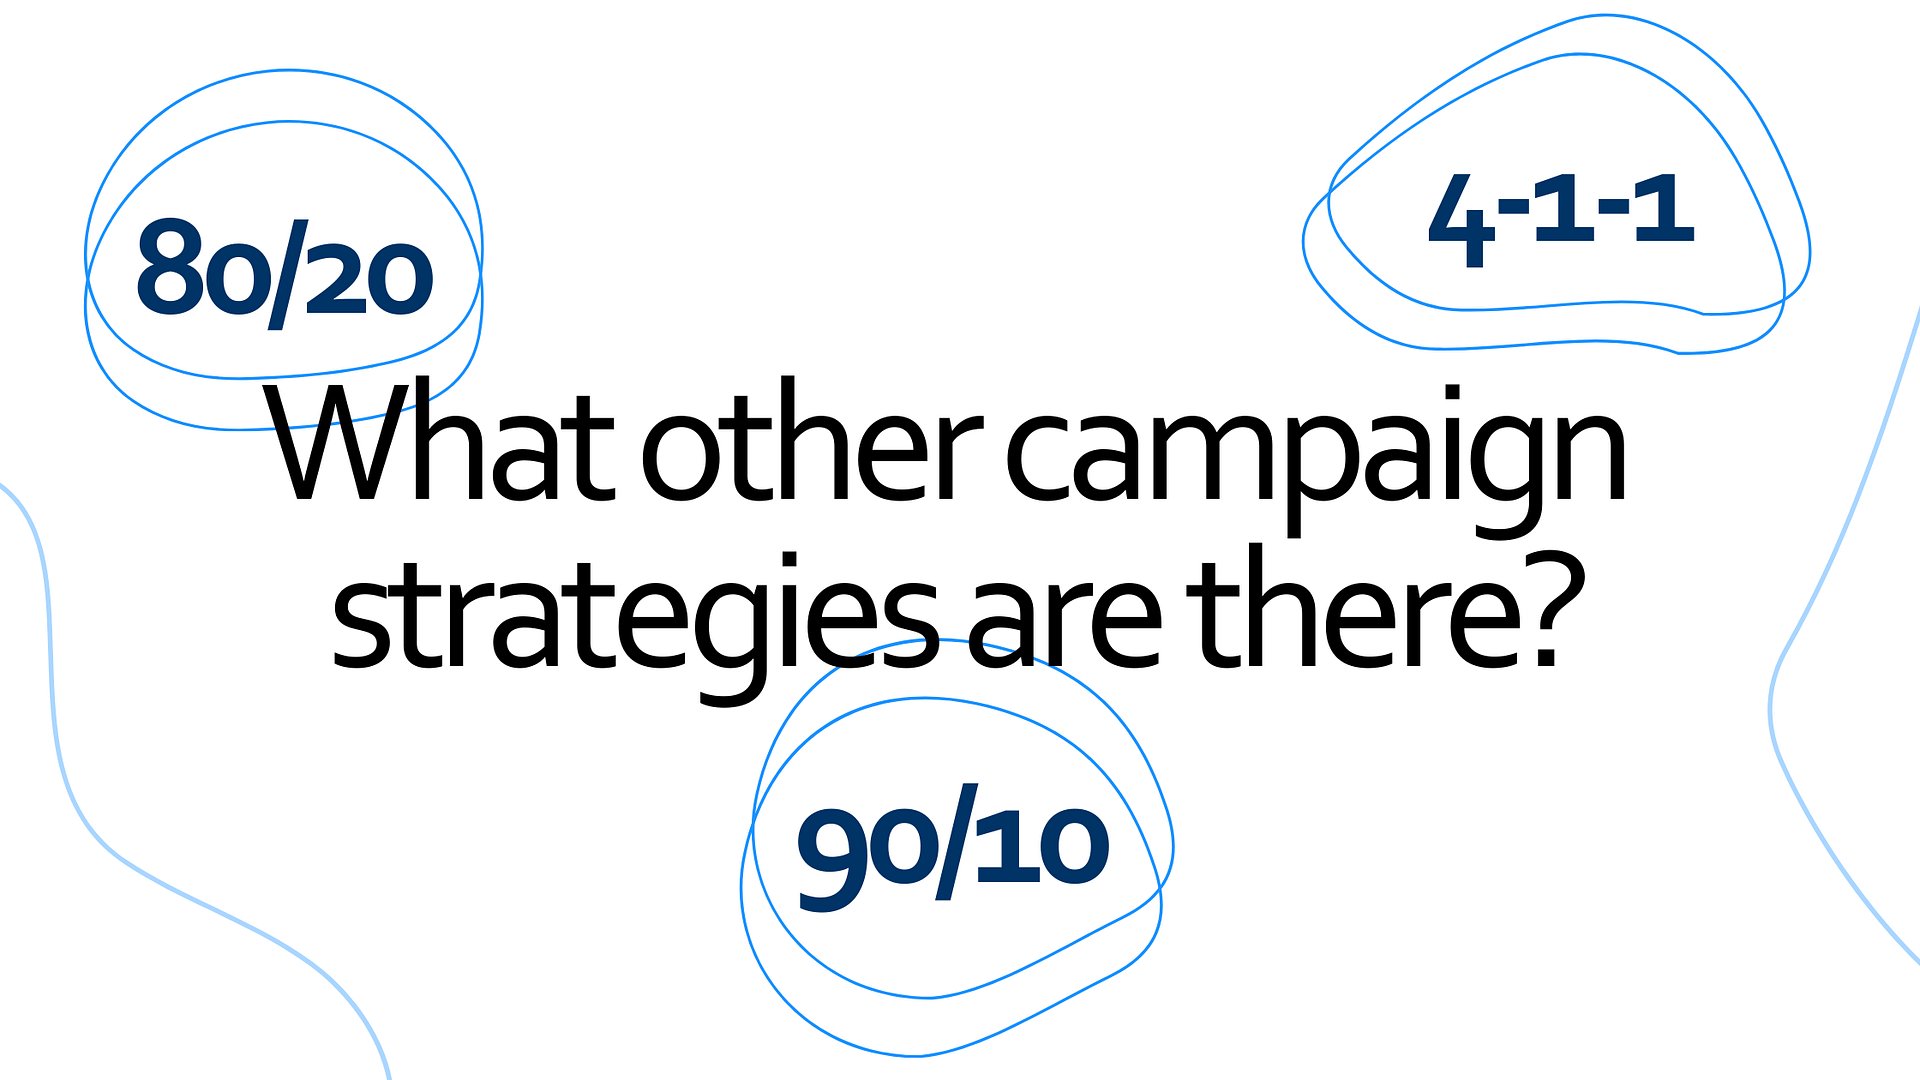 What other campaign strategies are there?